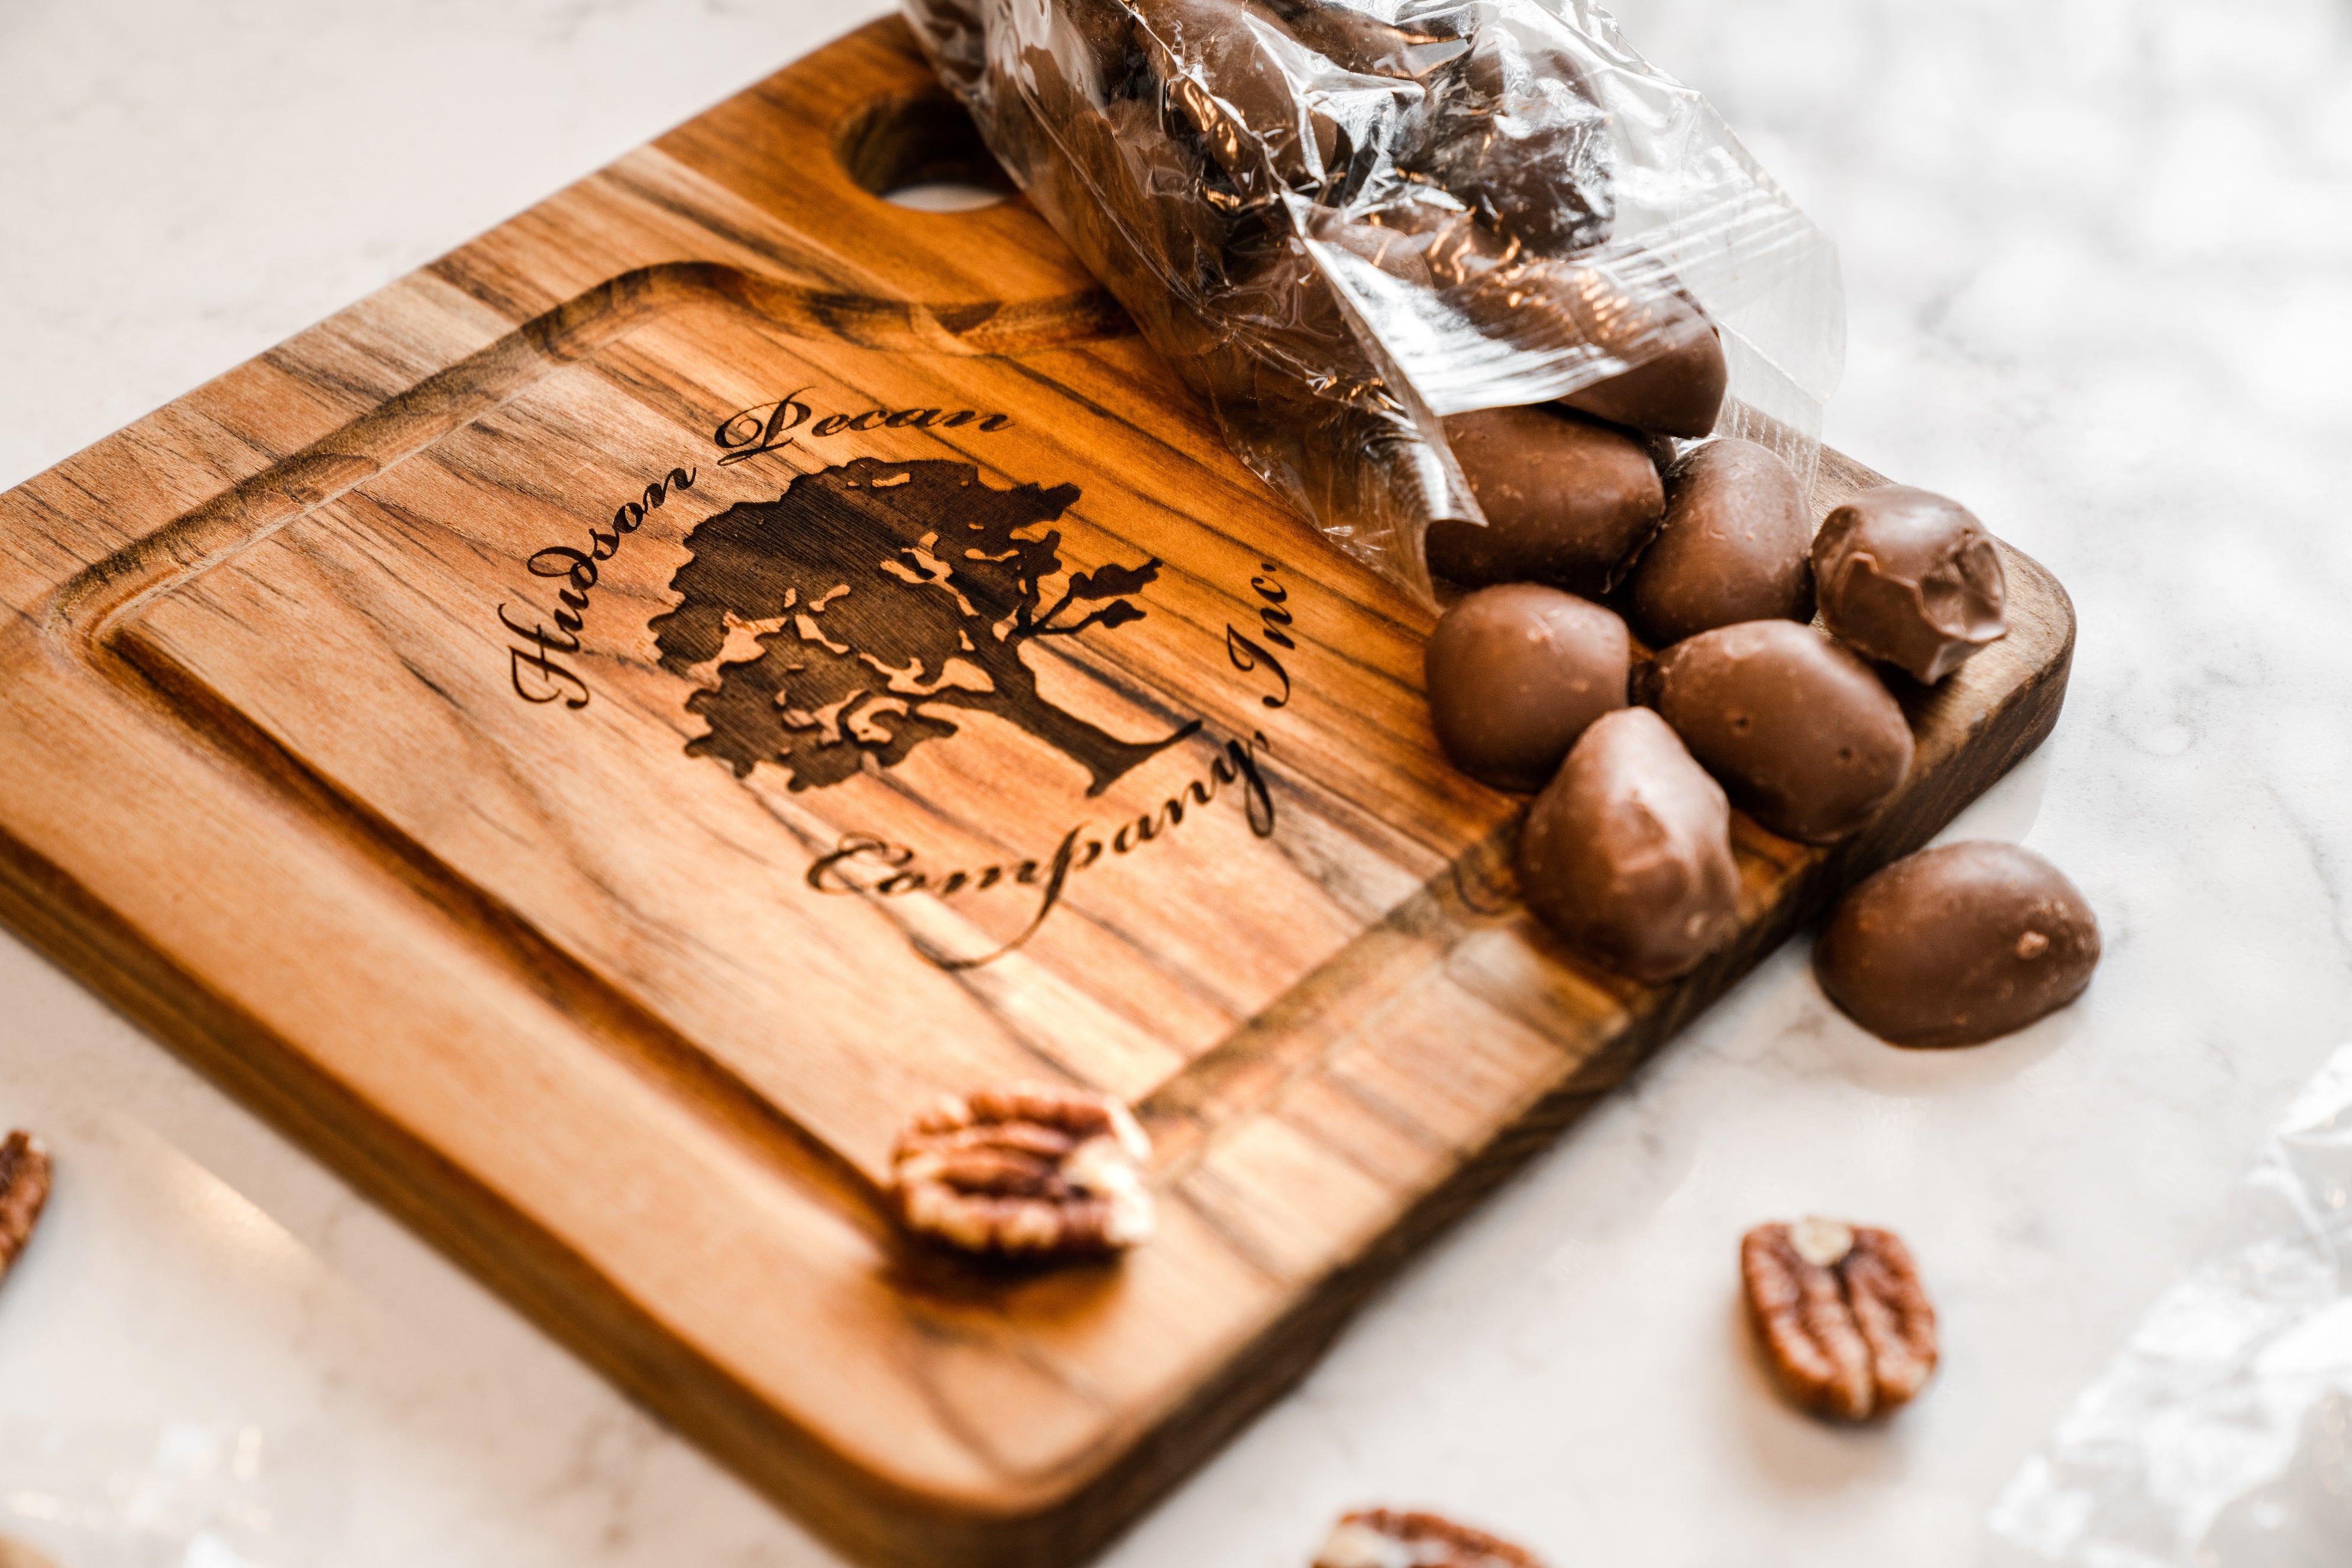 Milk Chocolate Covered 3-Pack - Hudson Pecan Company